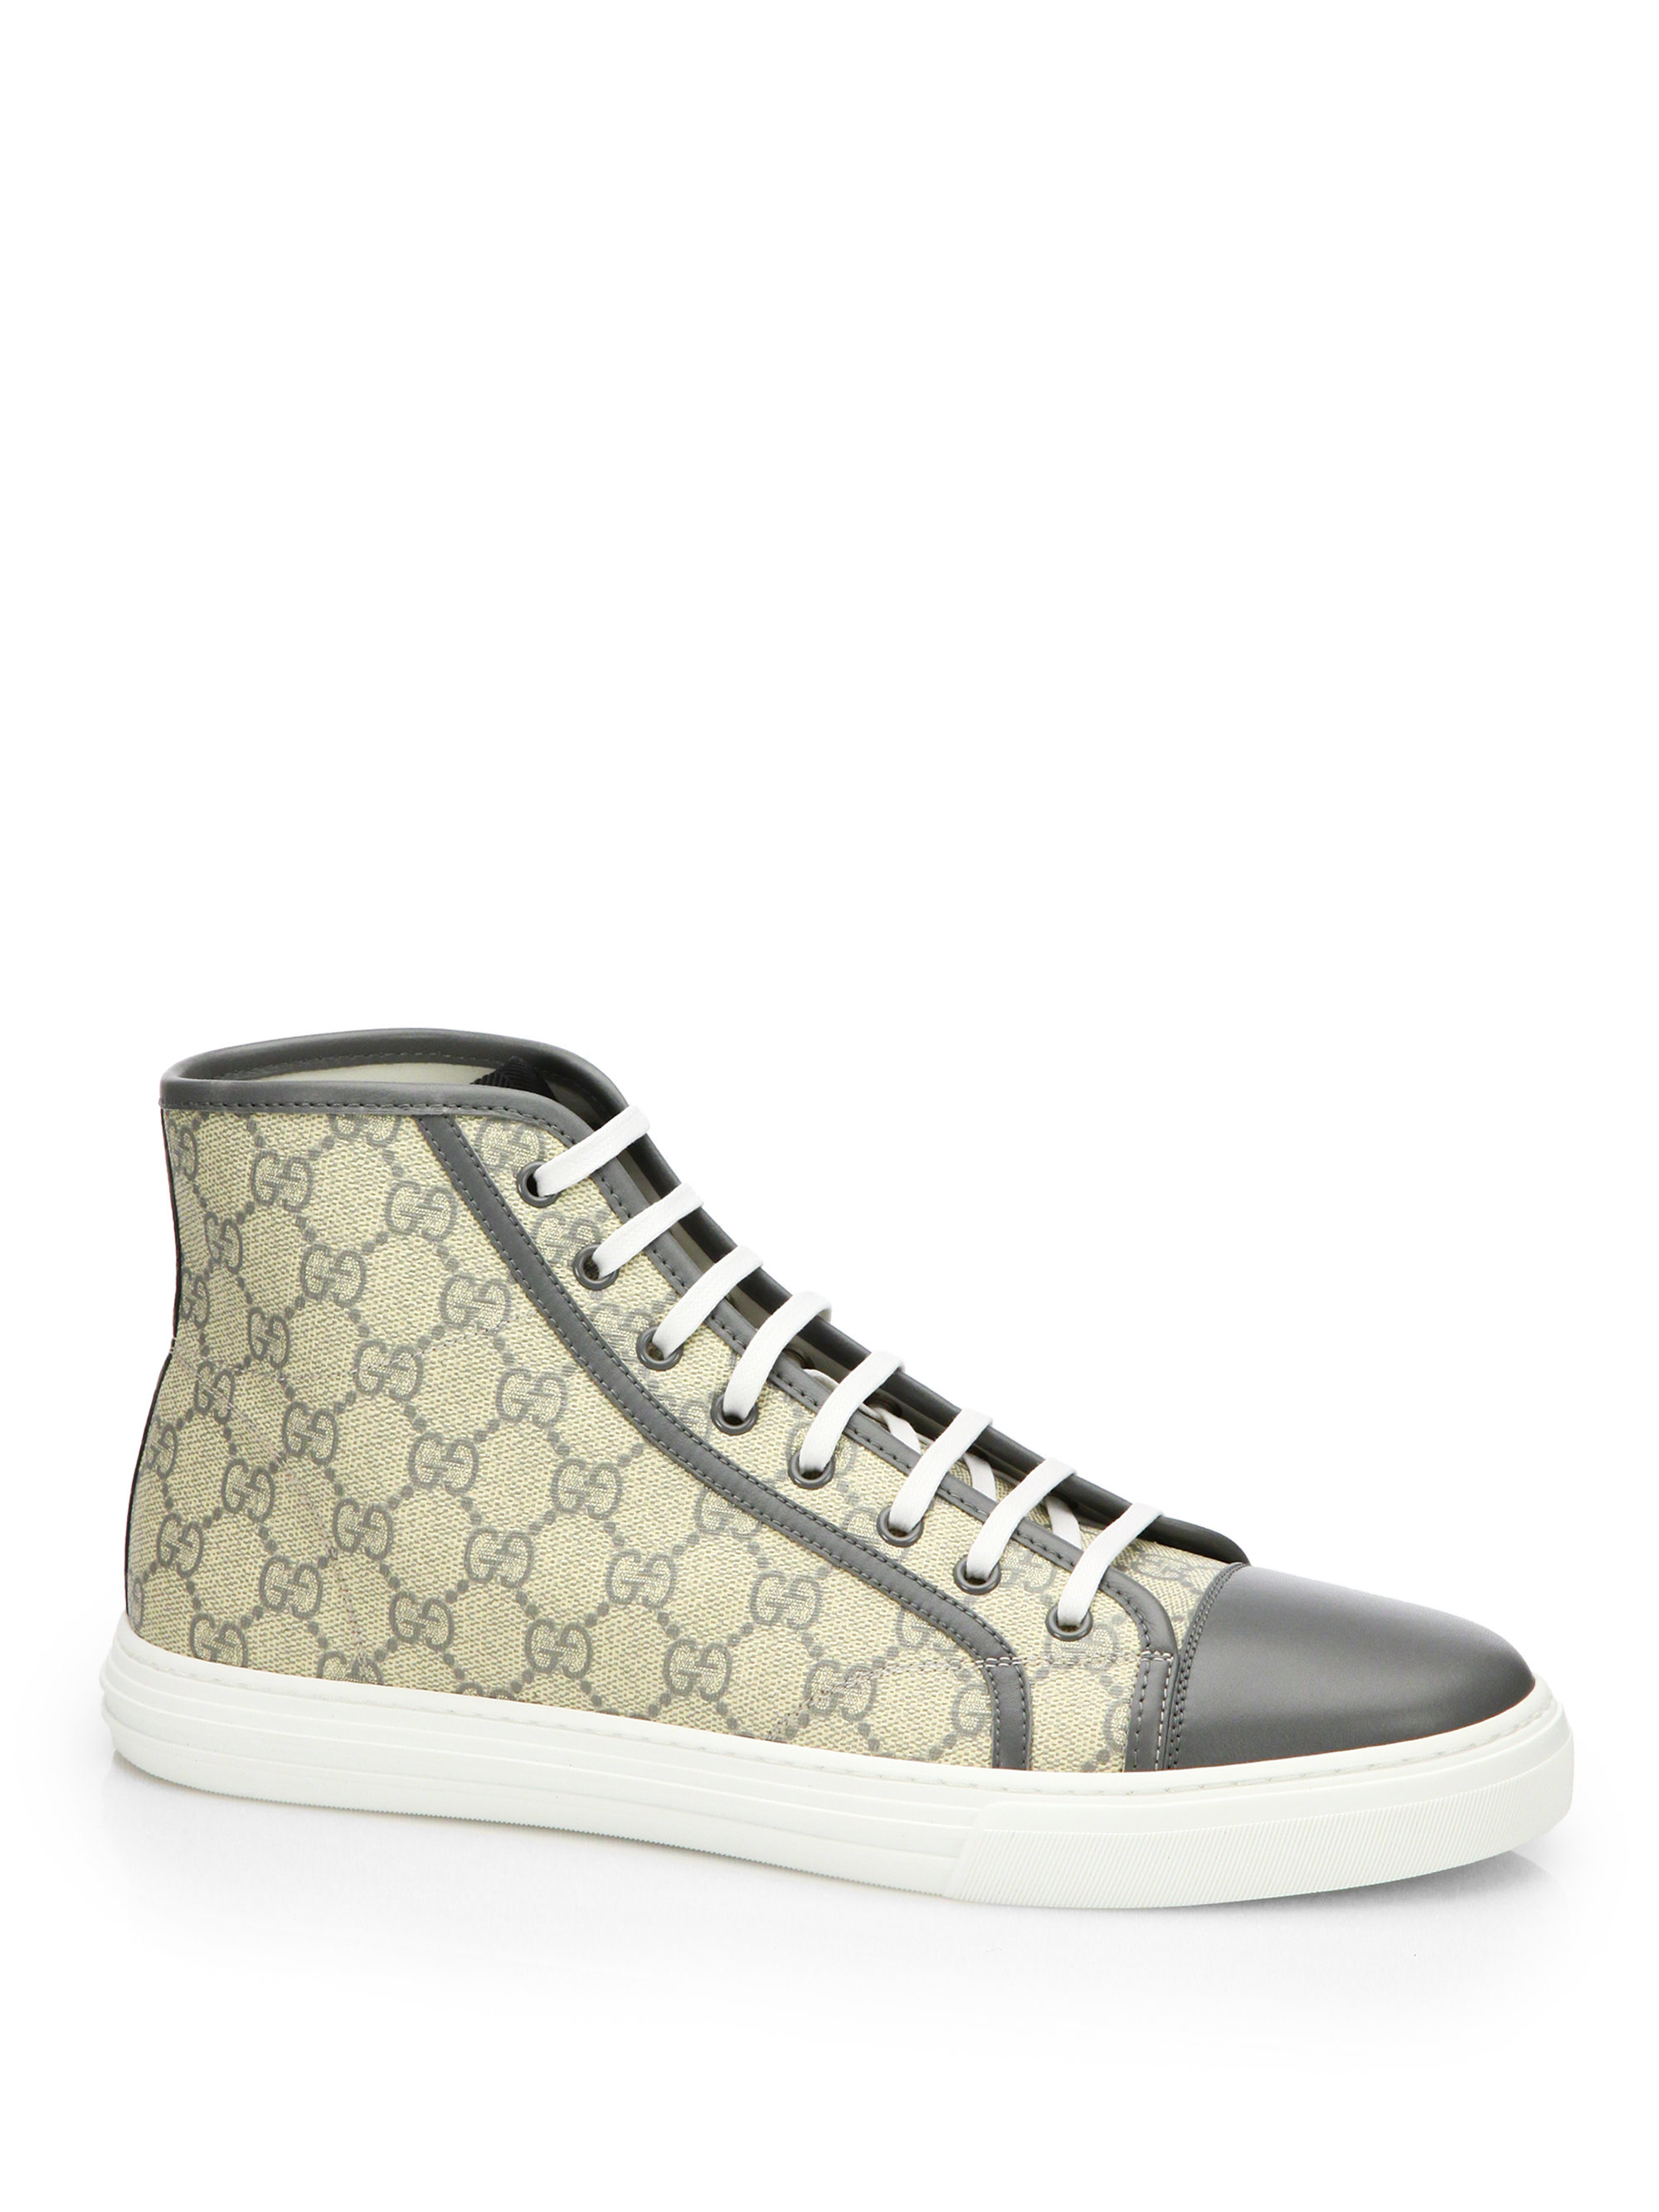 Lyst - Gucci Gg Supreme Canvas & Leather High-Top Sneakers in Natural ...